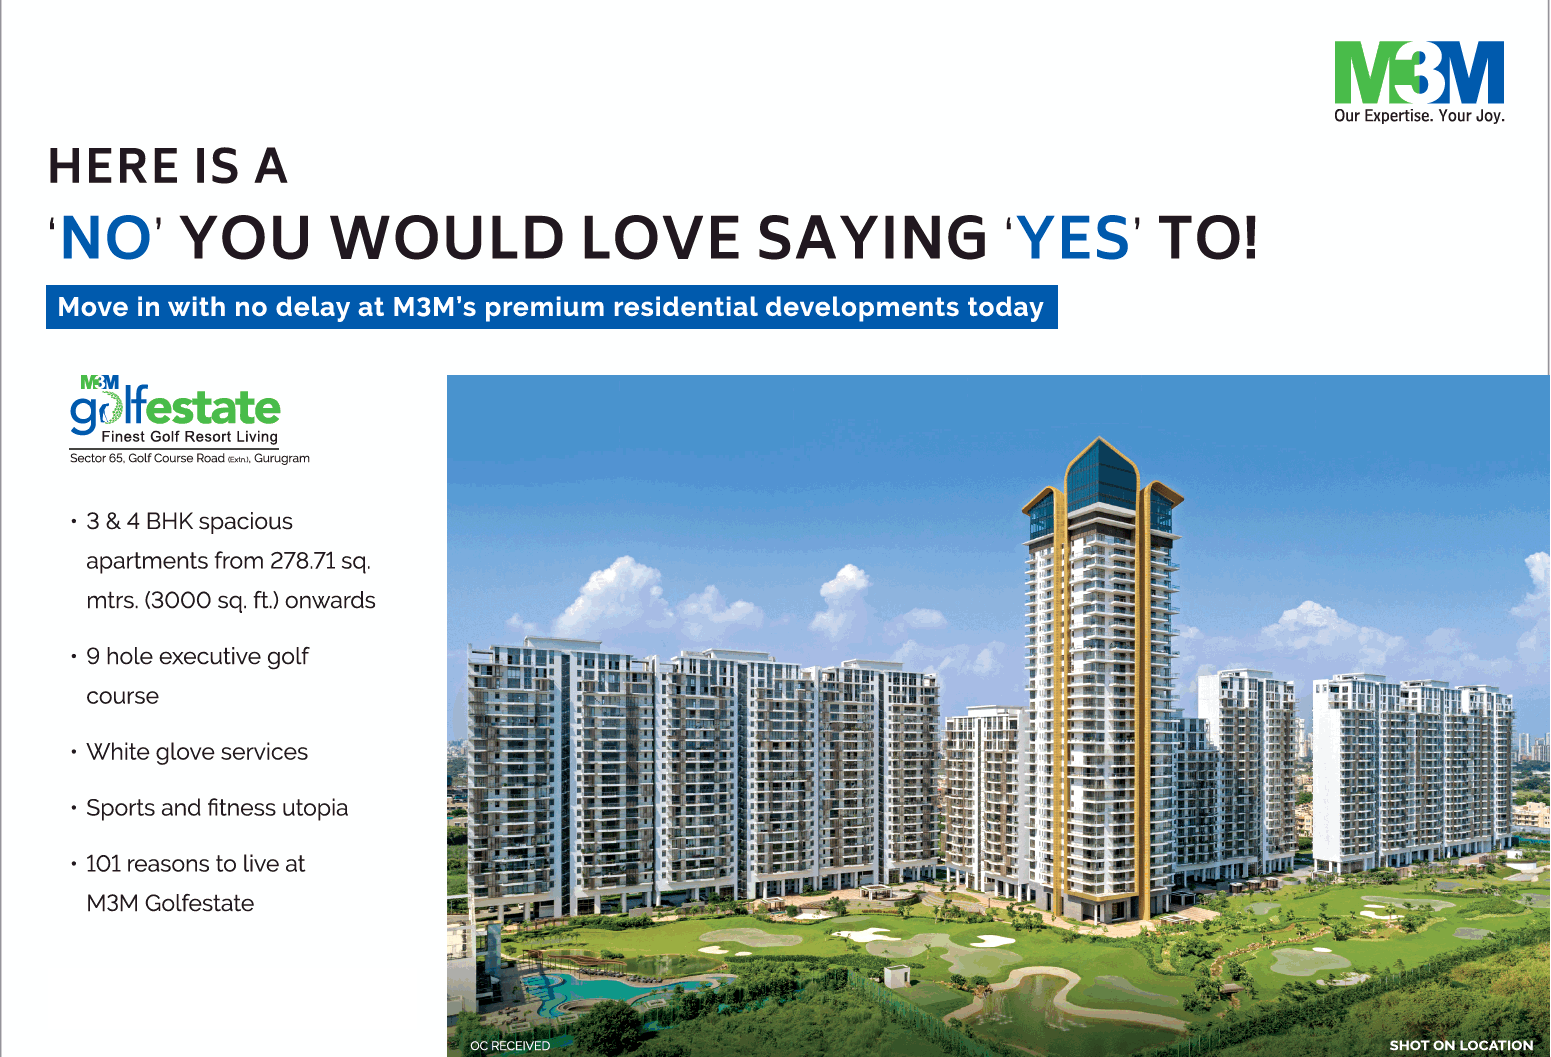 Move in with no delay at M3M Golf Estate premium residential developments today in Gurgaon